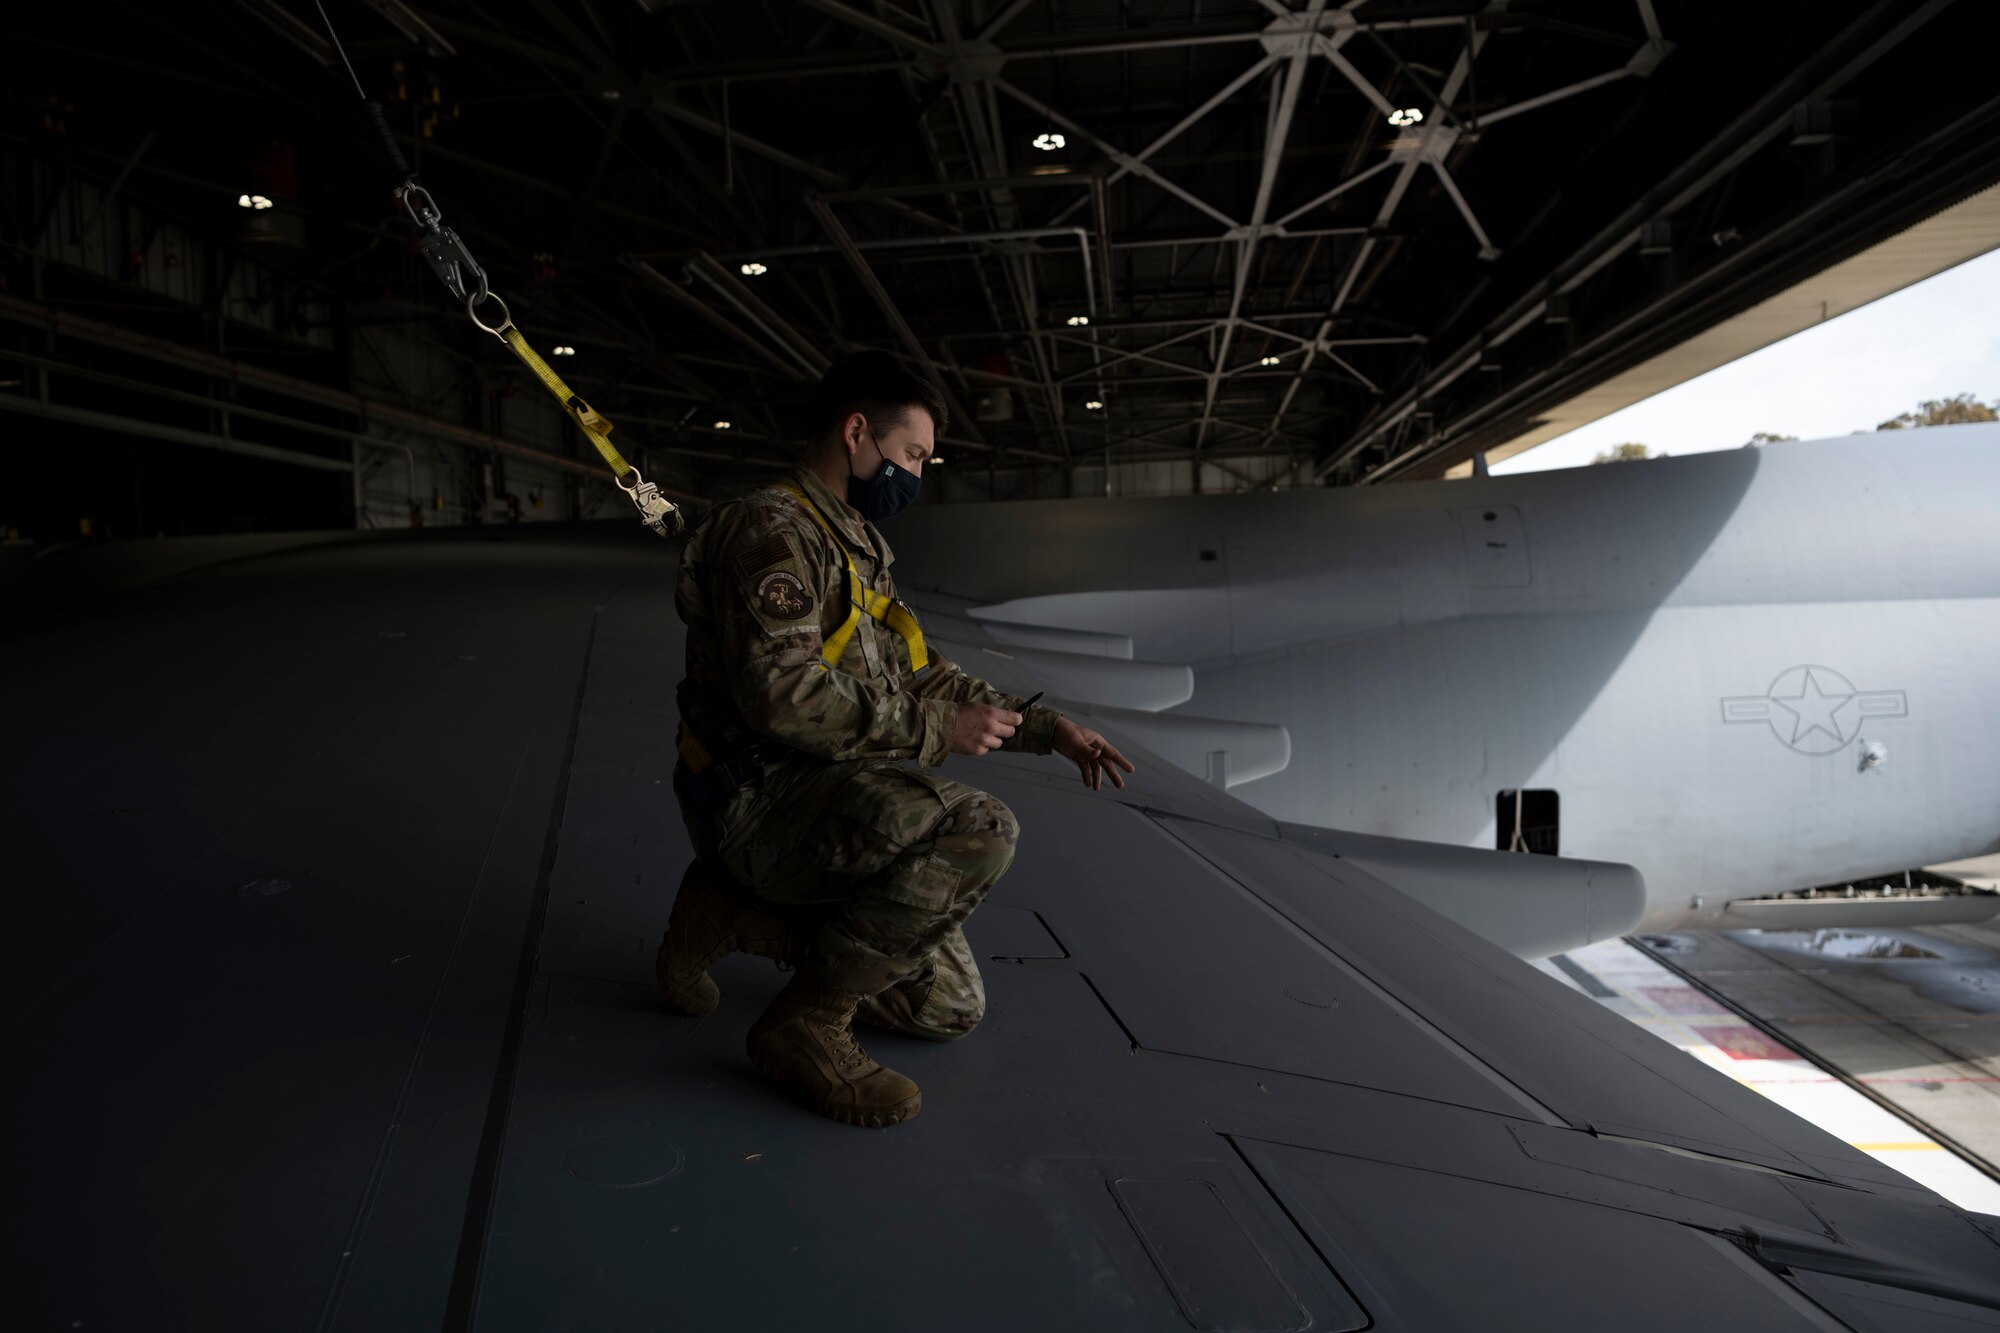 U.S. Air Force Staff Sgt. Jacob Hall, 60th Aircraft Maintenance Squadron home station check dock controller, points at the wing during a left wing inspection on a C-5M Super Galaxy March 19, 2021, at Travis Air Force Base, California. Airmen collaborated with the Air Staff Logistics Directorate’s Tesseract team and key partners from the C-5 program office to implement commercial maintenance practices in scheduling and completing maintenance around flying demands. (U.S. Air Force photo by Airman 1st Class Alexander Merchak)